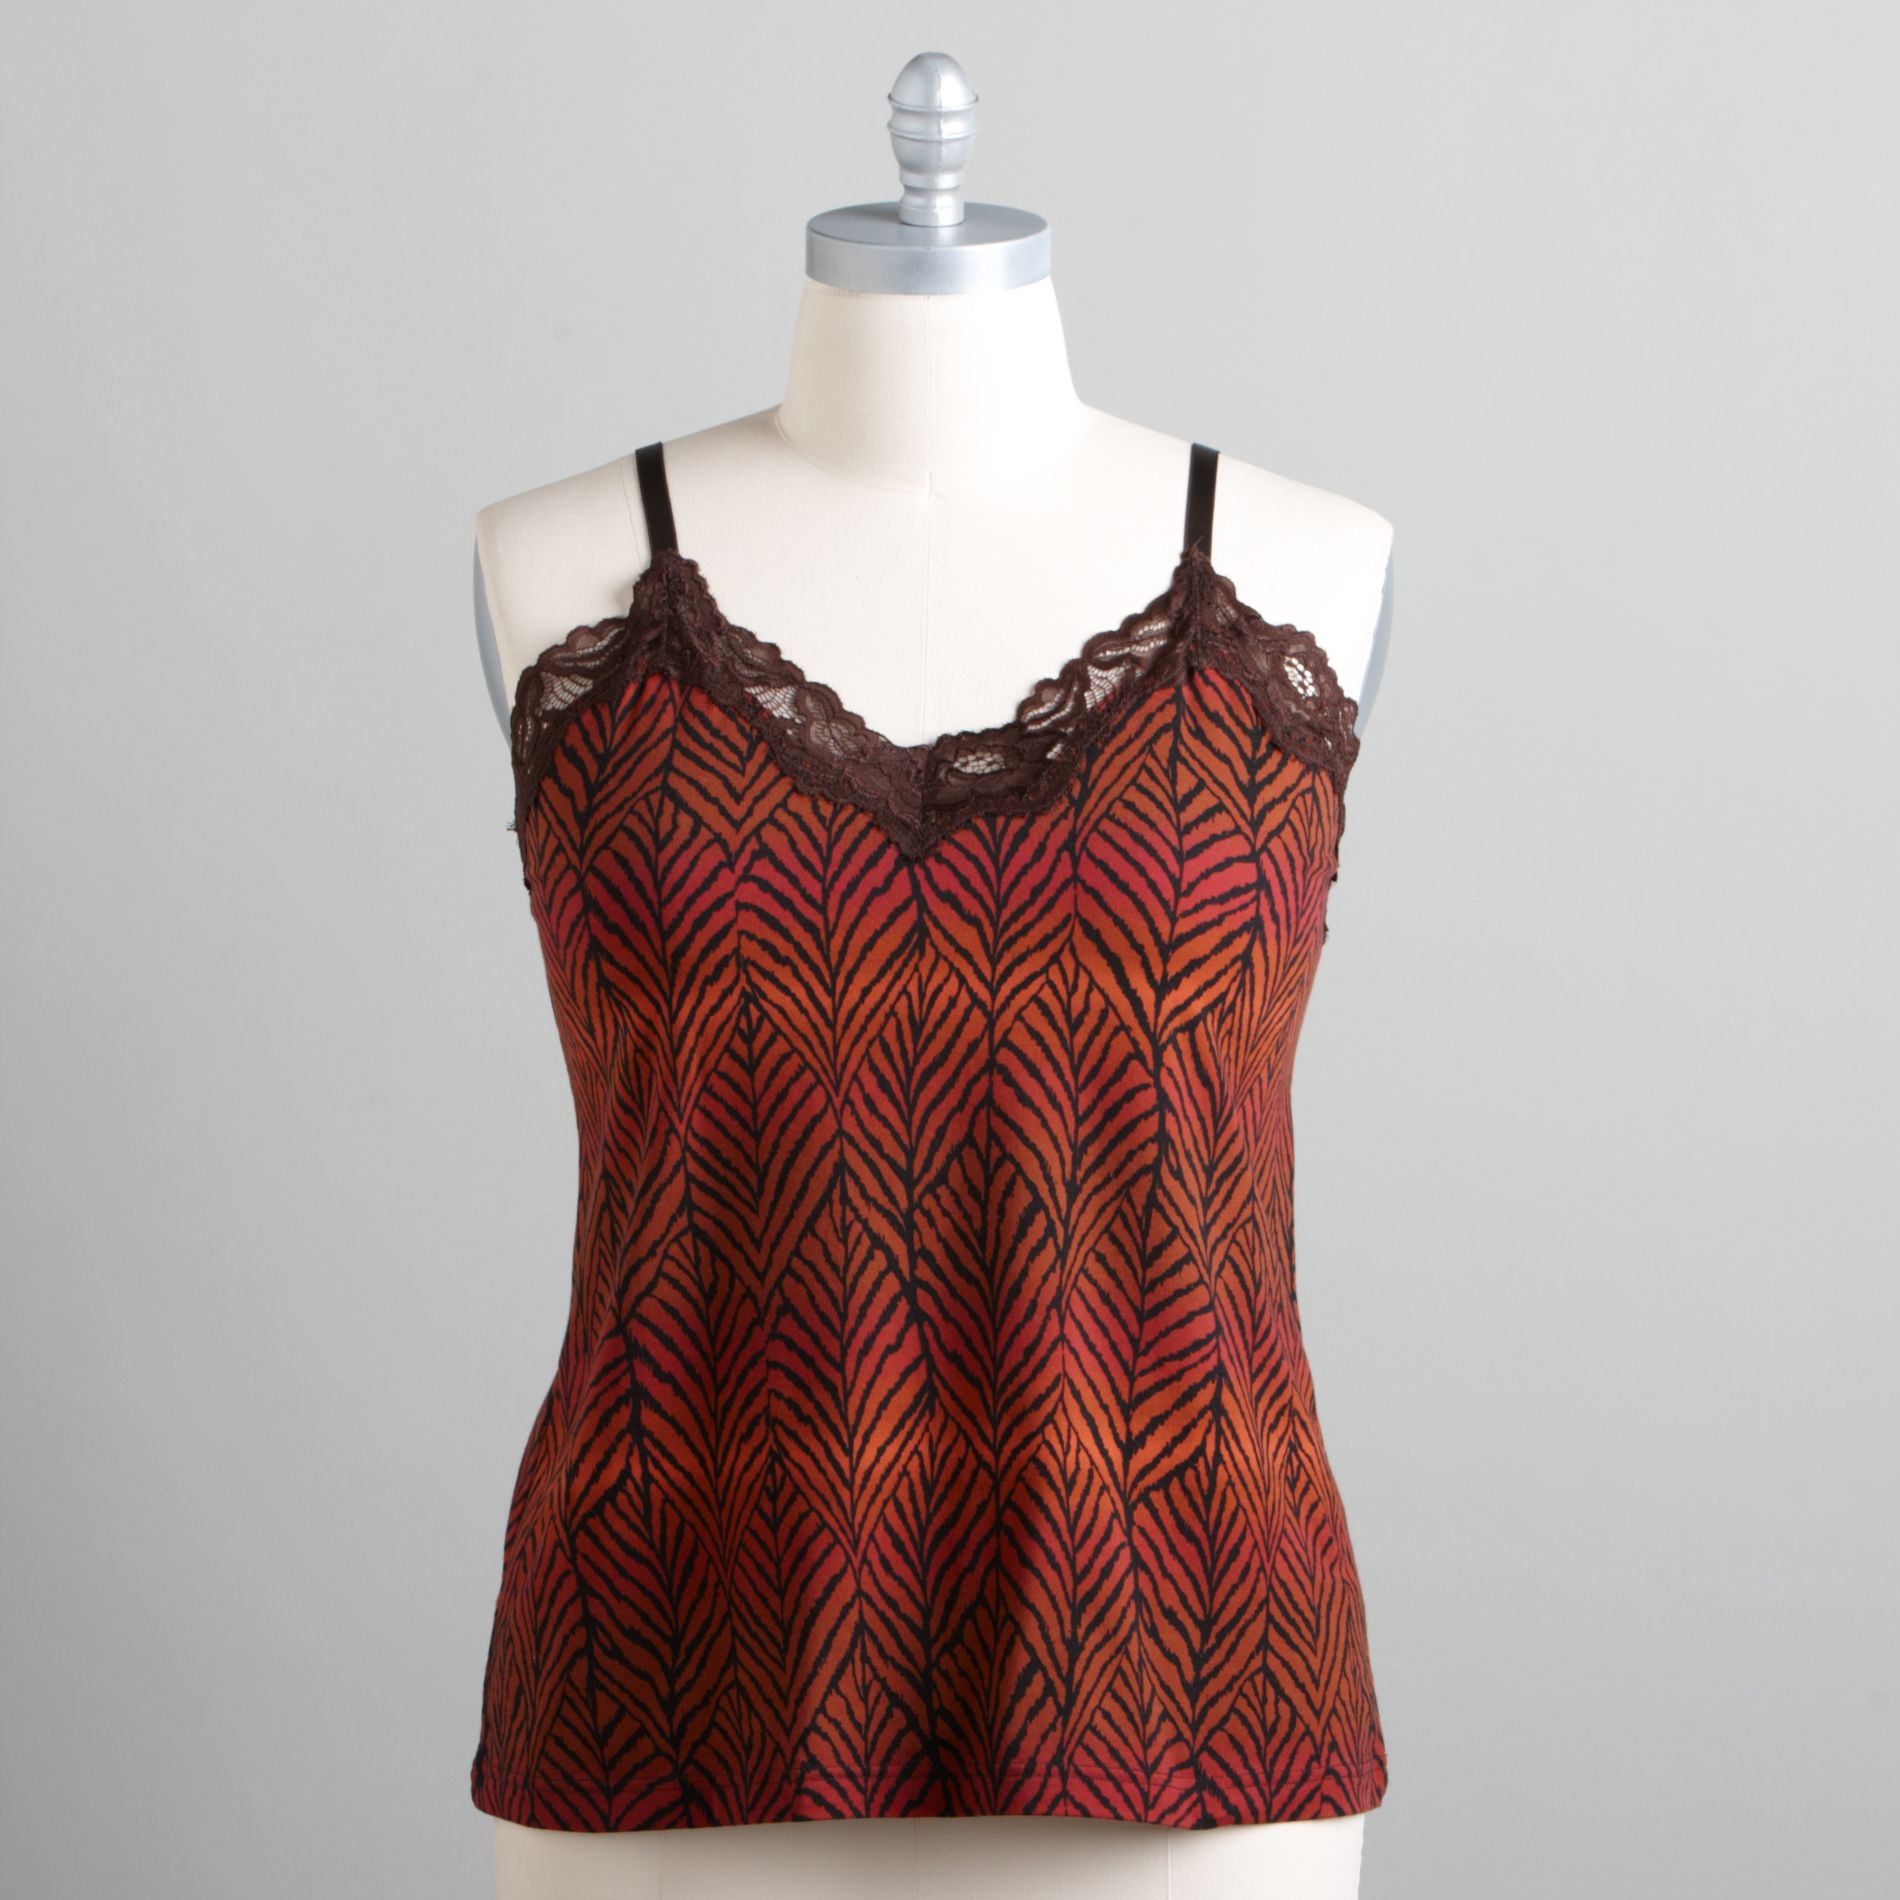 Love Your Style, Love Your Size Women's Plus Long Lace Print Cami